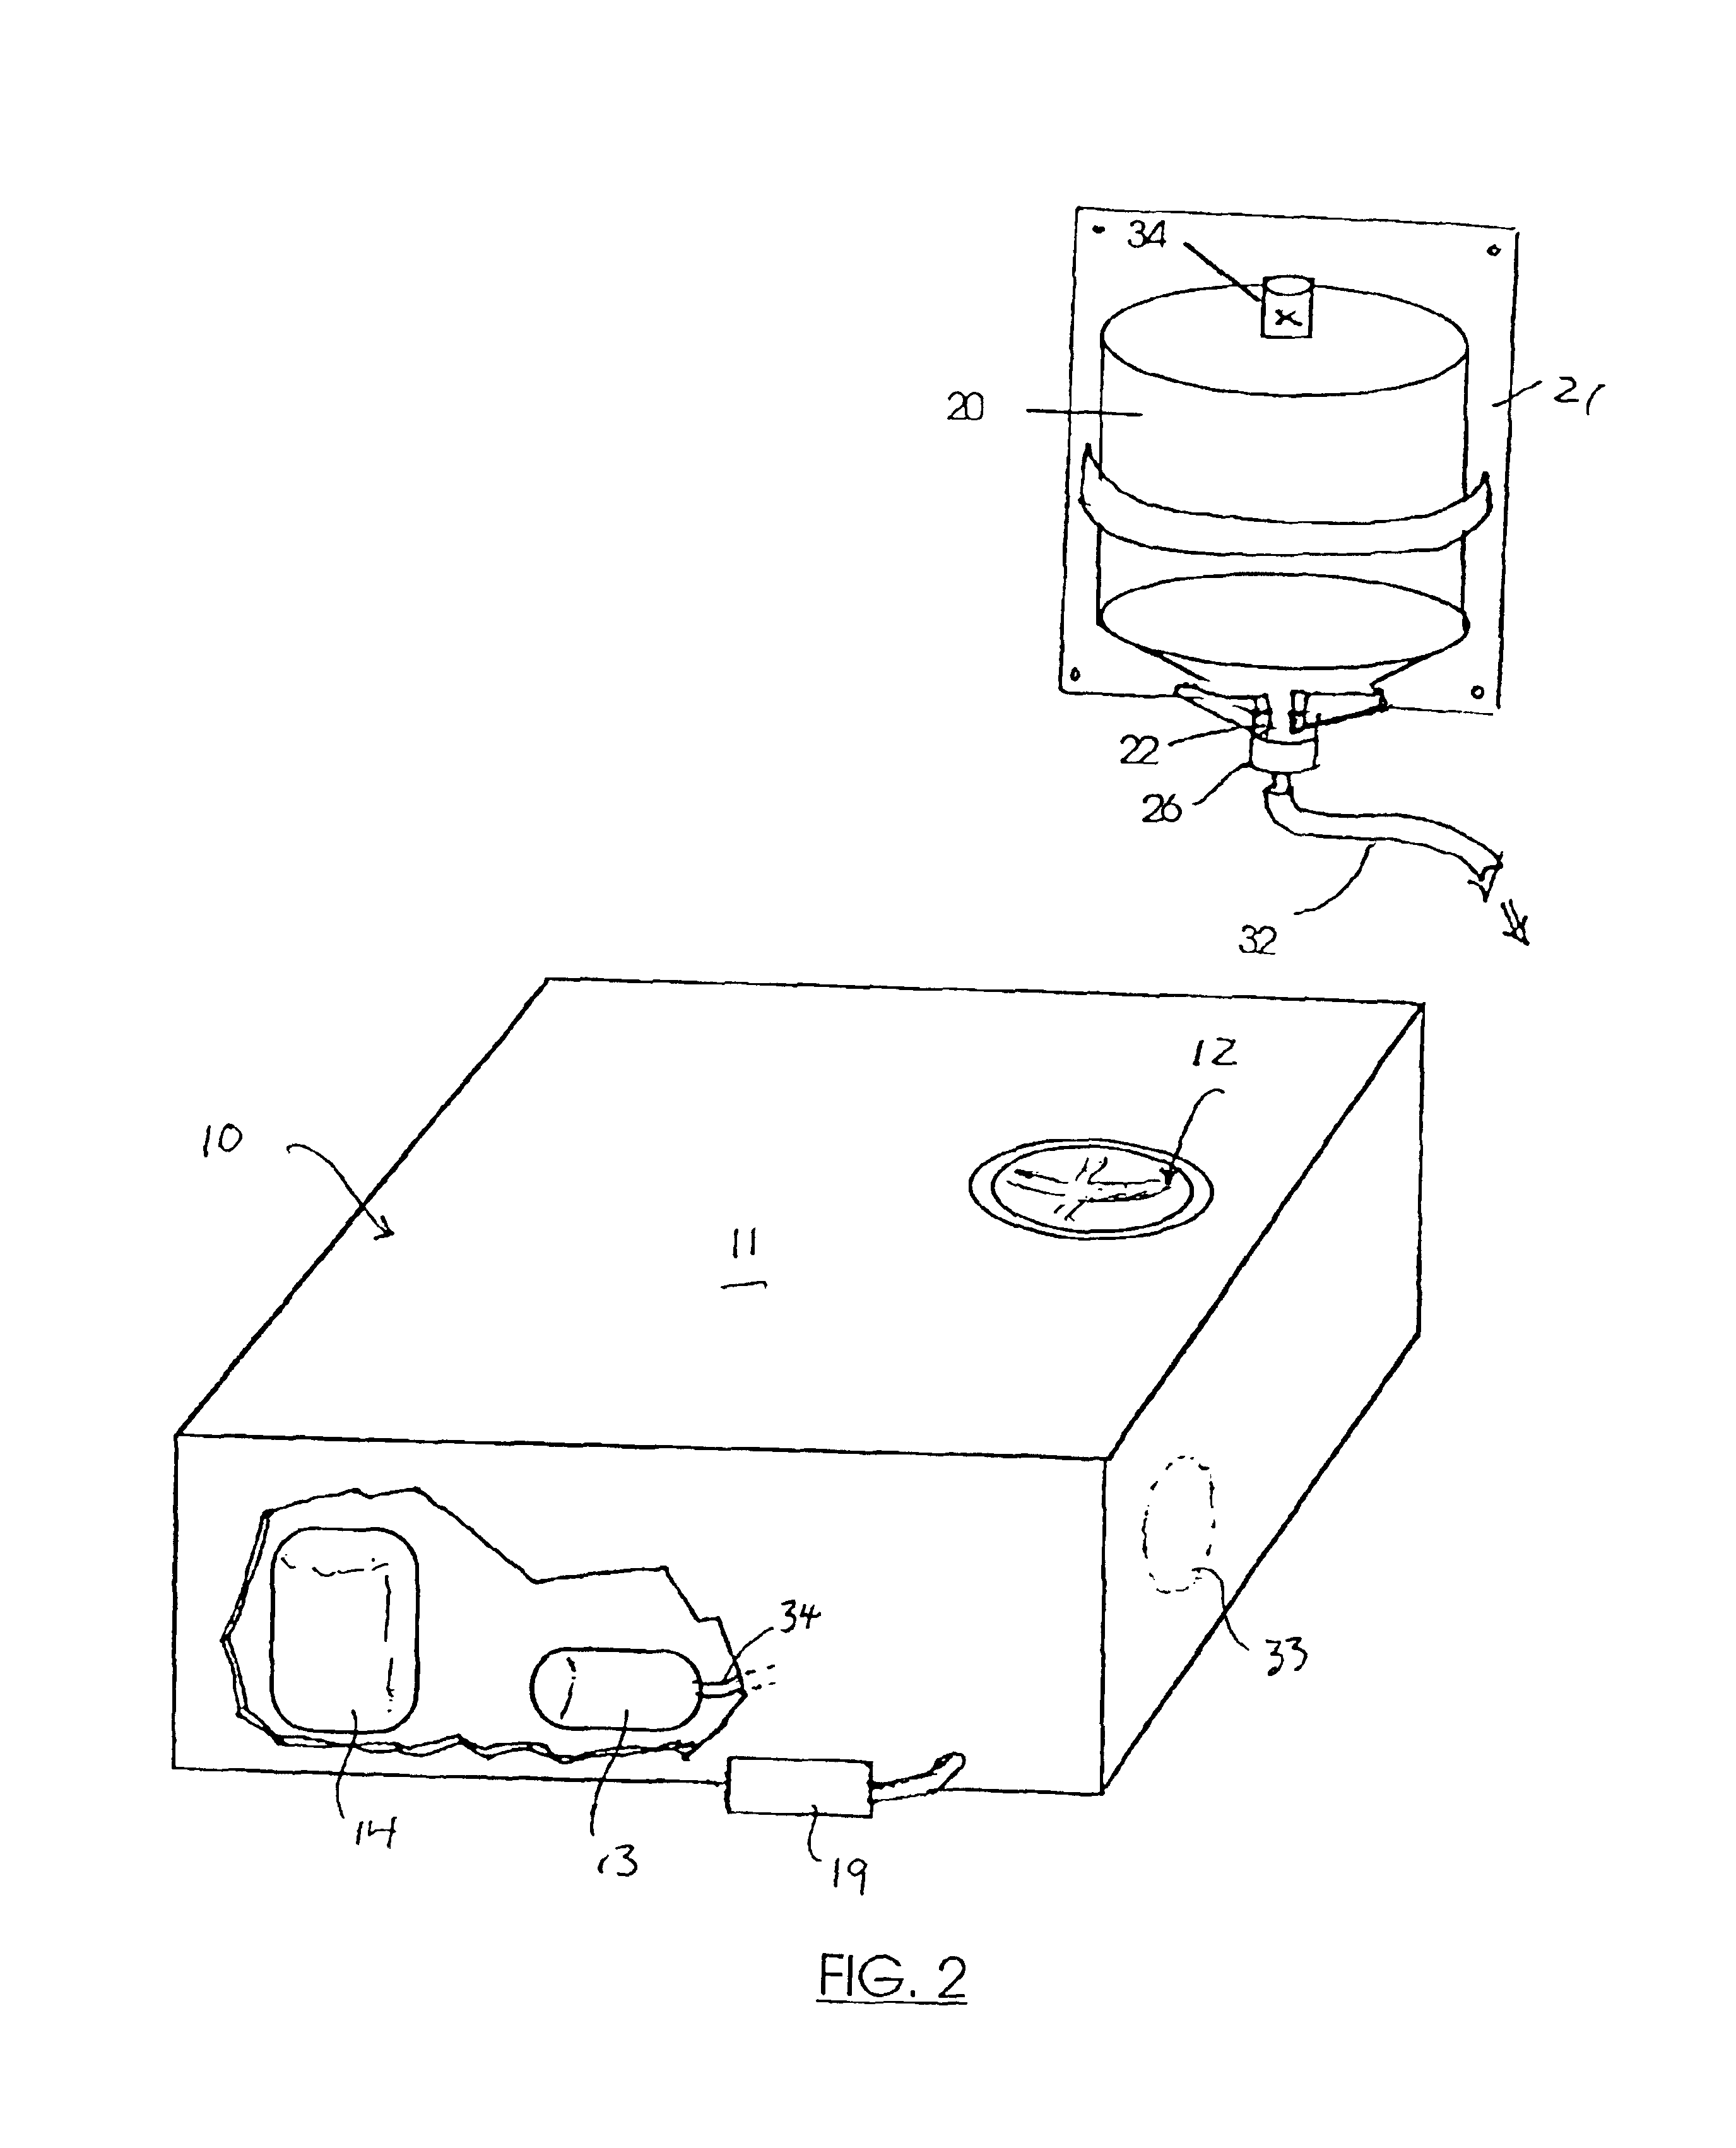 Method and apparatus for reducing outbreaks of diffuse lamellar keratitis